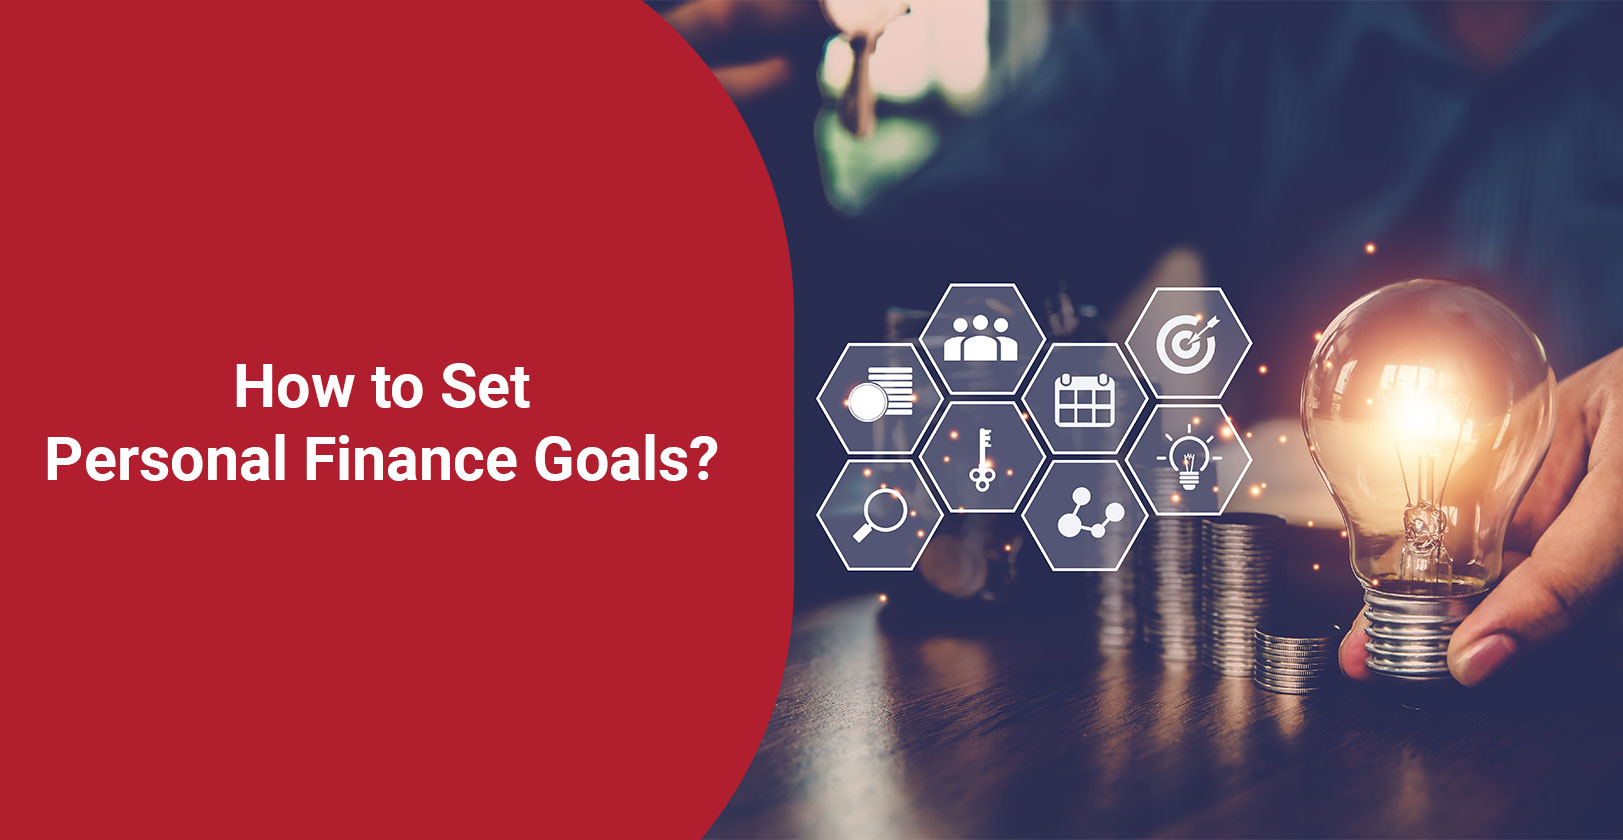 How to Set Personal Finance Goals?